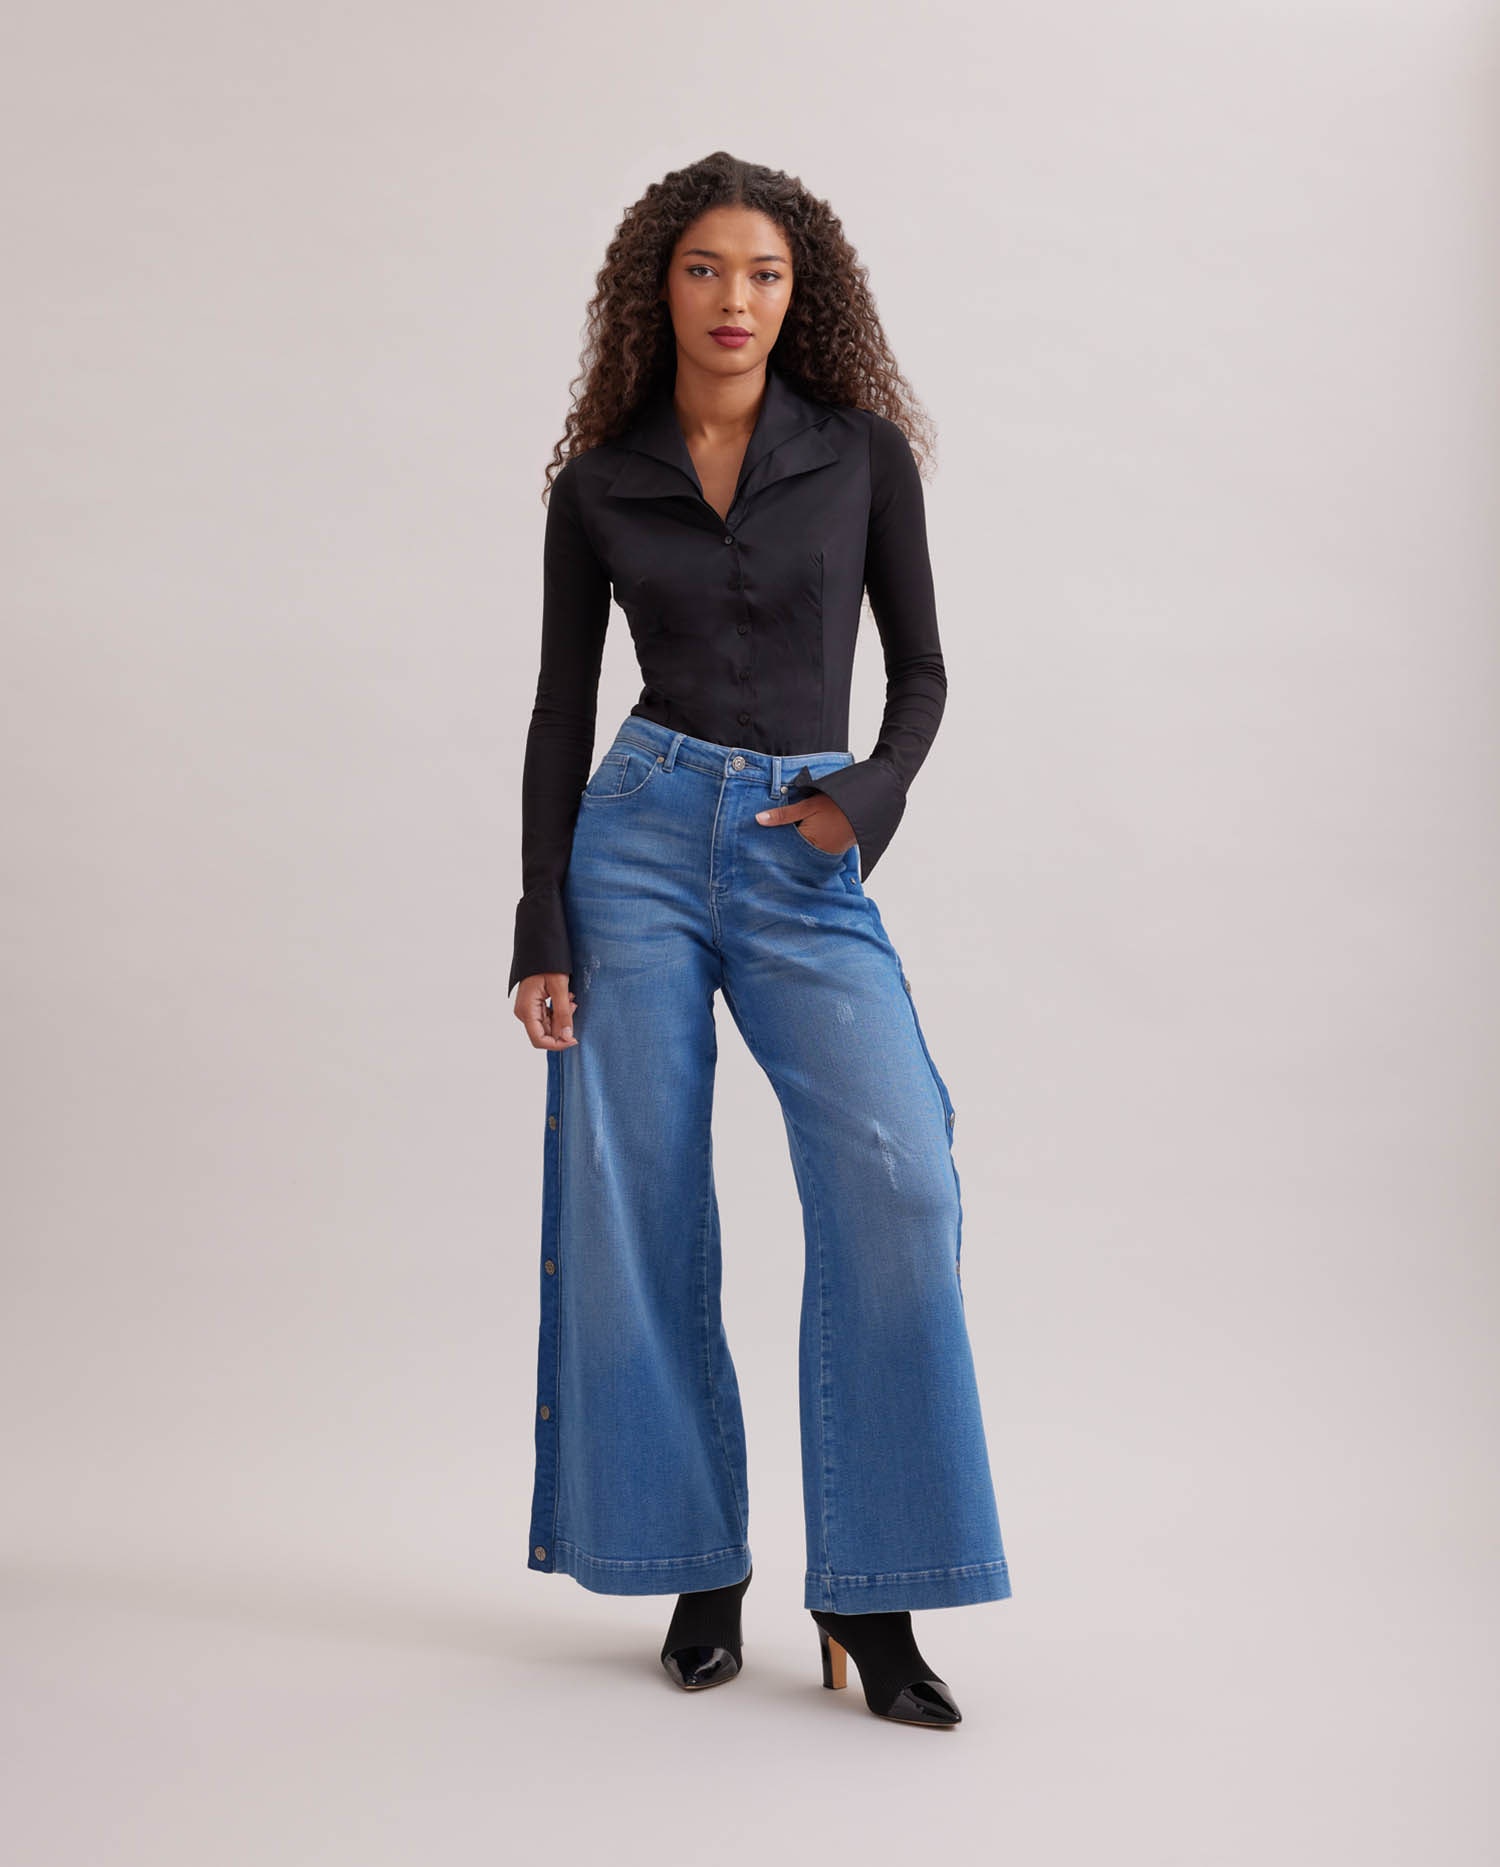 Discover The PRESLEY Wide leg denim jeans with metal snaps from ANNE FONTAINE